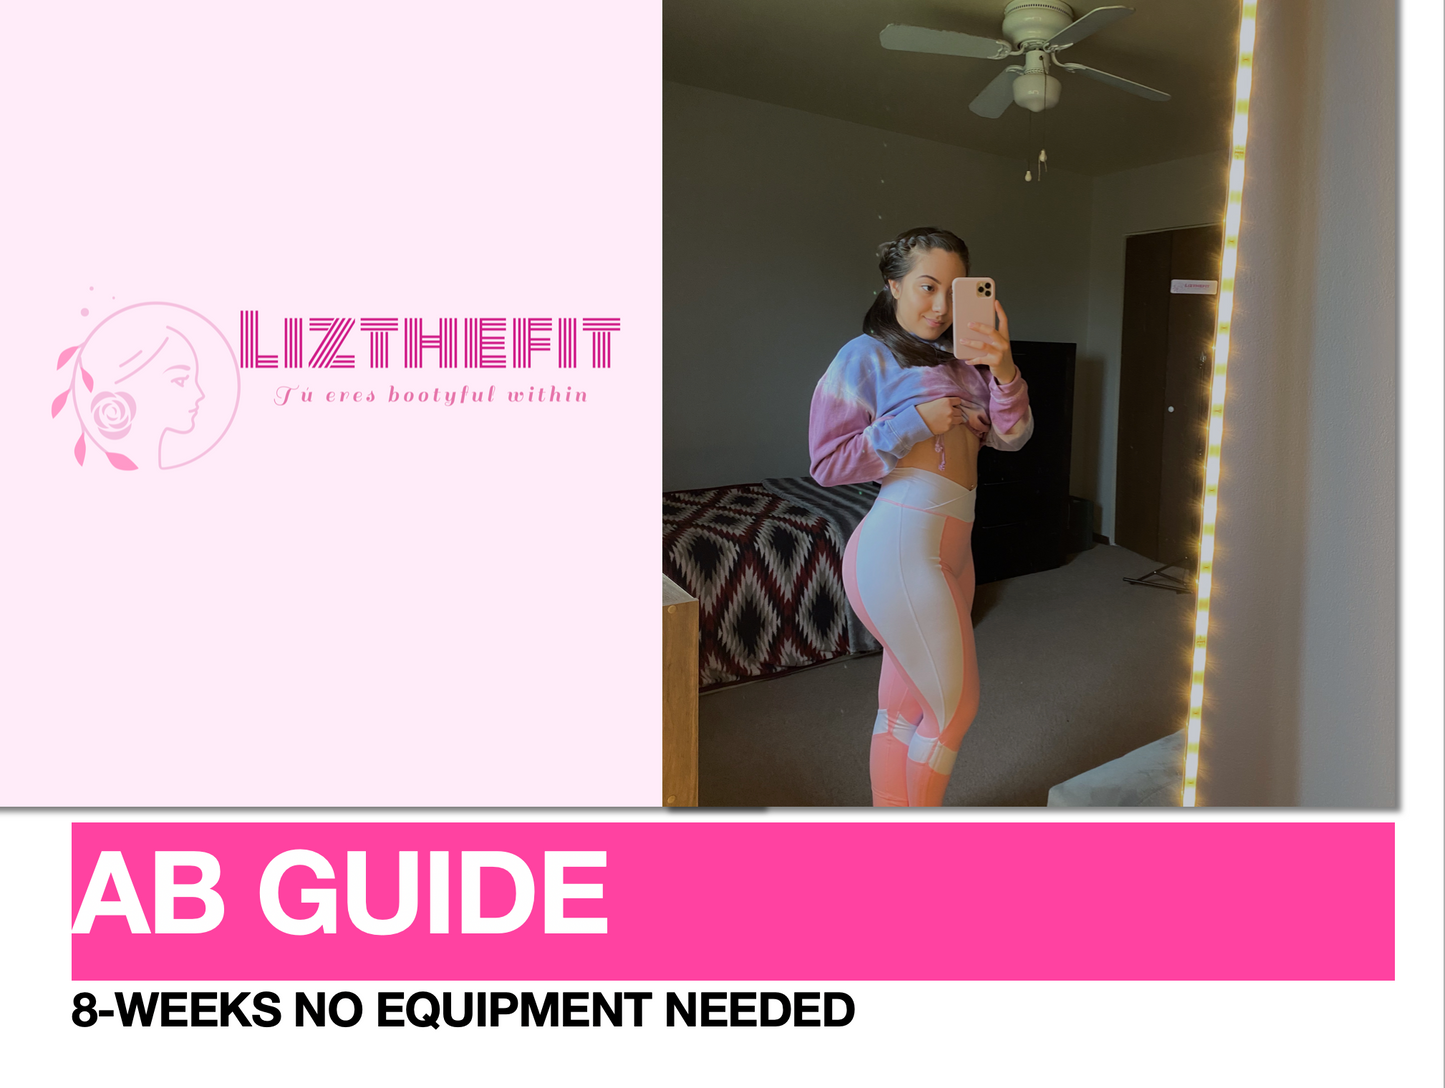 Ab Guide Home Guide - LIZTHEFIT